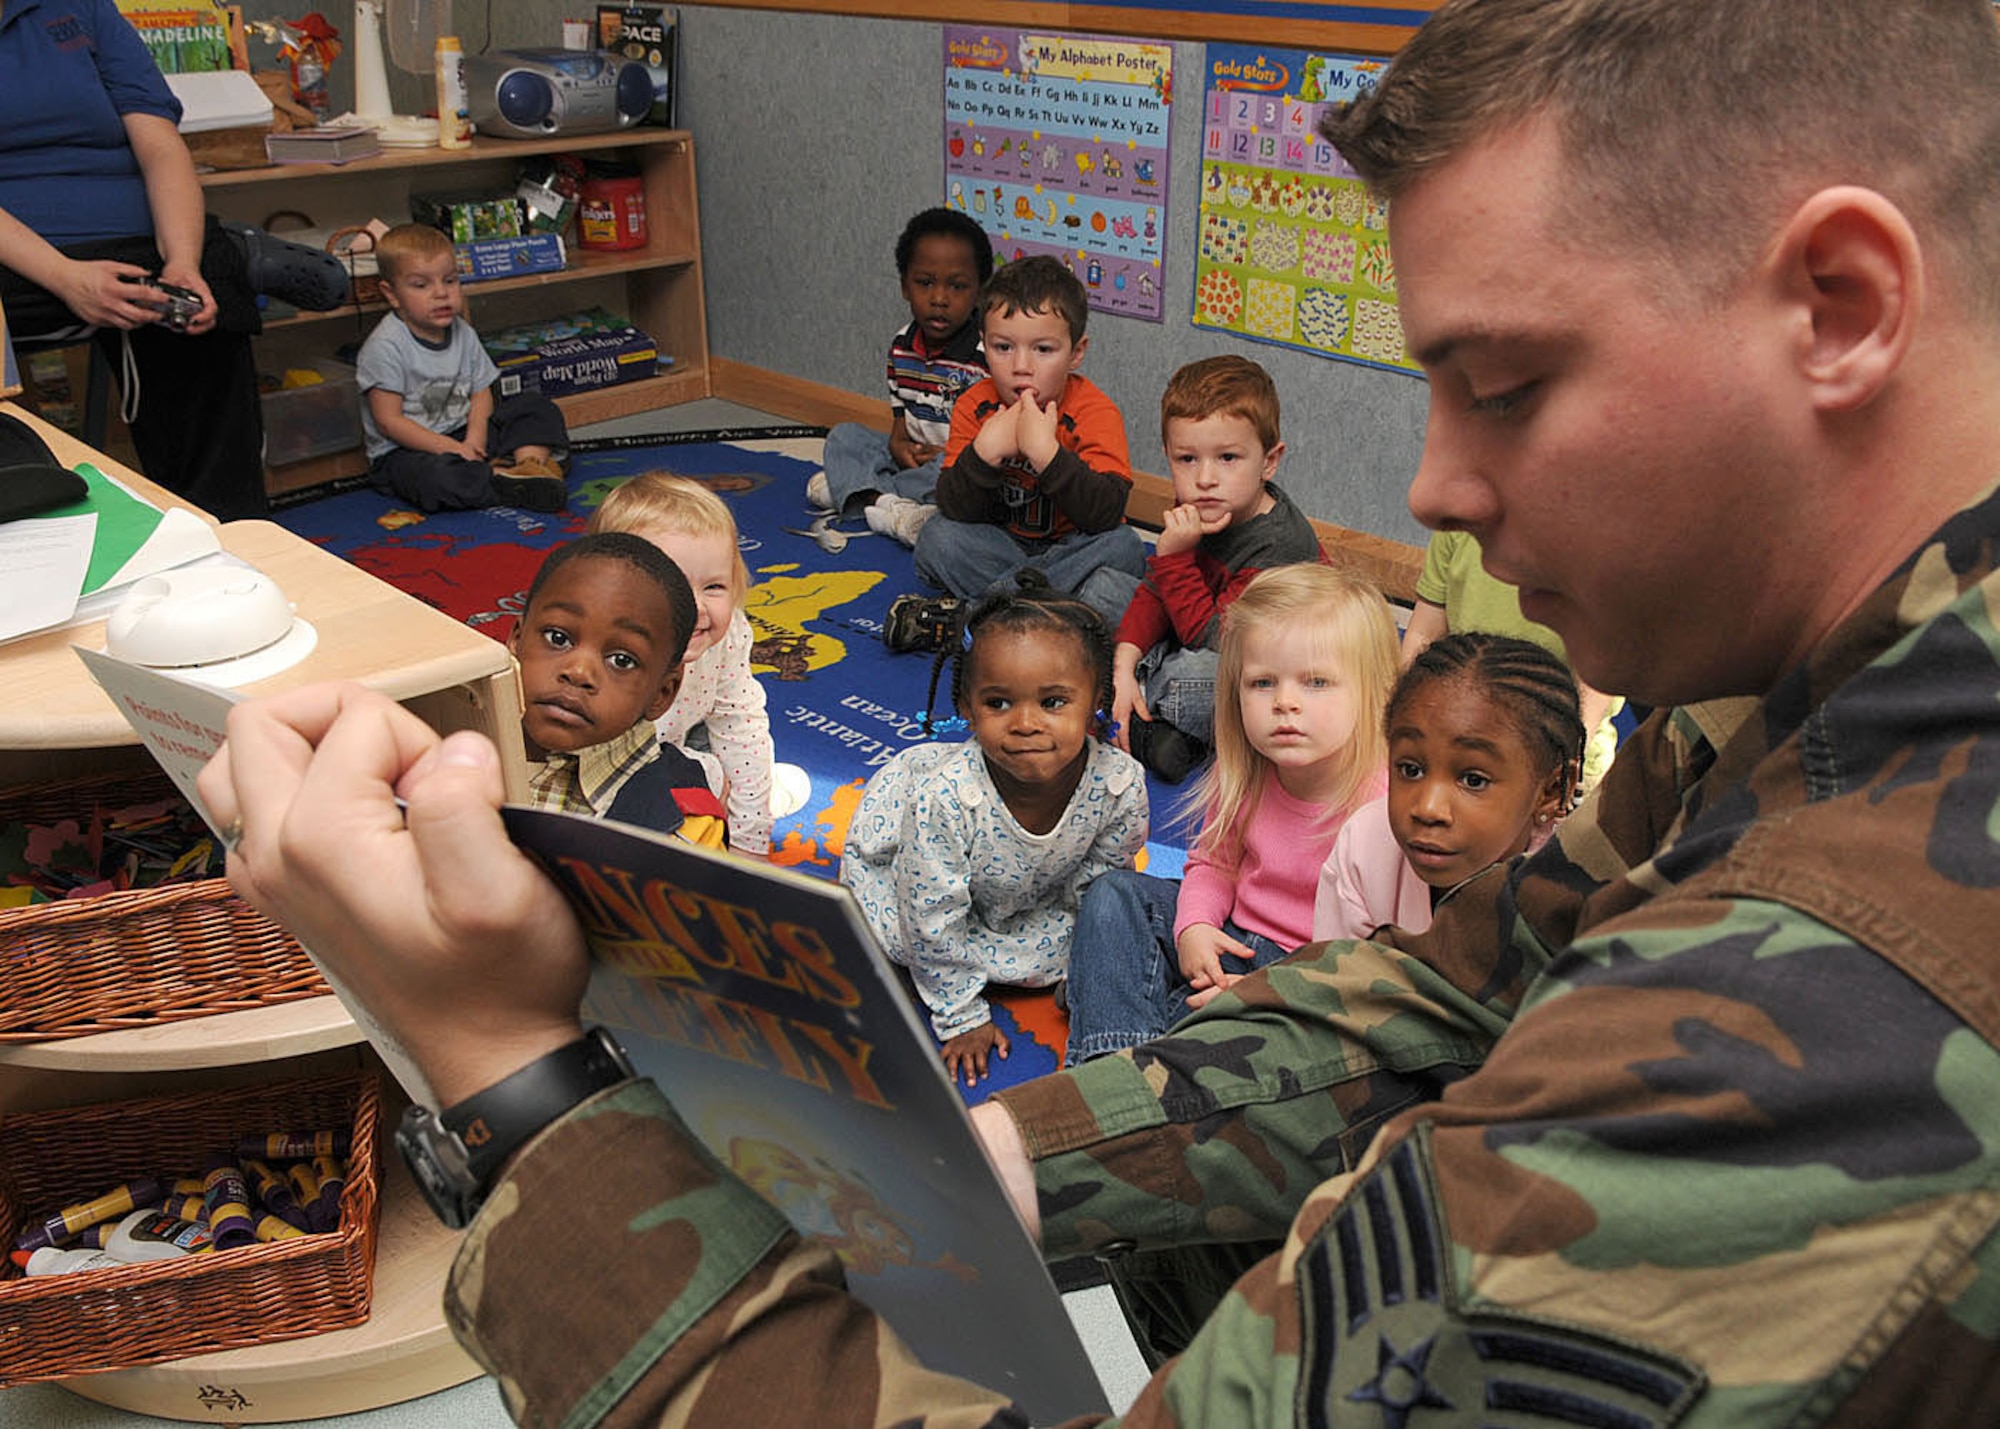 Staff Sgt. Guy Carriveau, a firefighter from the 100th Civil Engineering Squadron, reads a book to children ages 3 to 5 years old about the importance of fire safety at the Child Development Center Oct. 6, 2008, at RAF Mildenhall, England. The visit was in support of “Fire Prevention Week” that takes place from Oct. 5 through 11, providing servicemembers and their families helpful tips and information about fire safety. (U.S. Air Force photo by Staff Sgt. Jerry Fleshman)